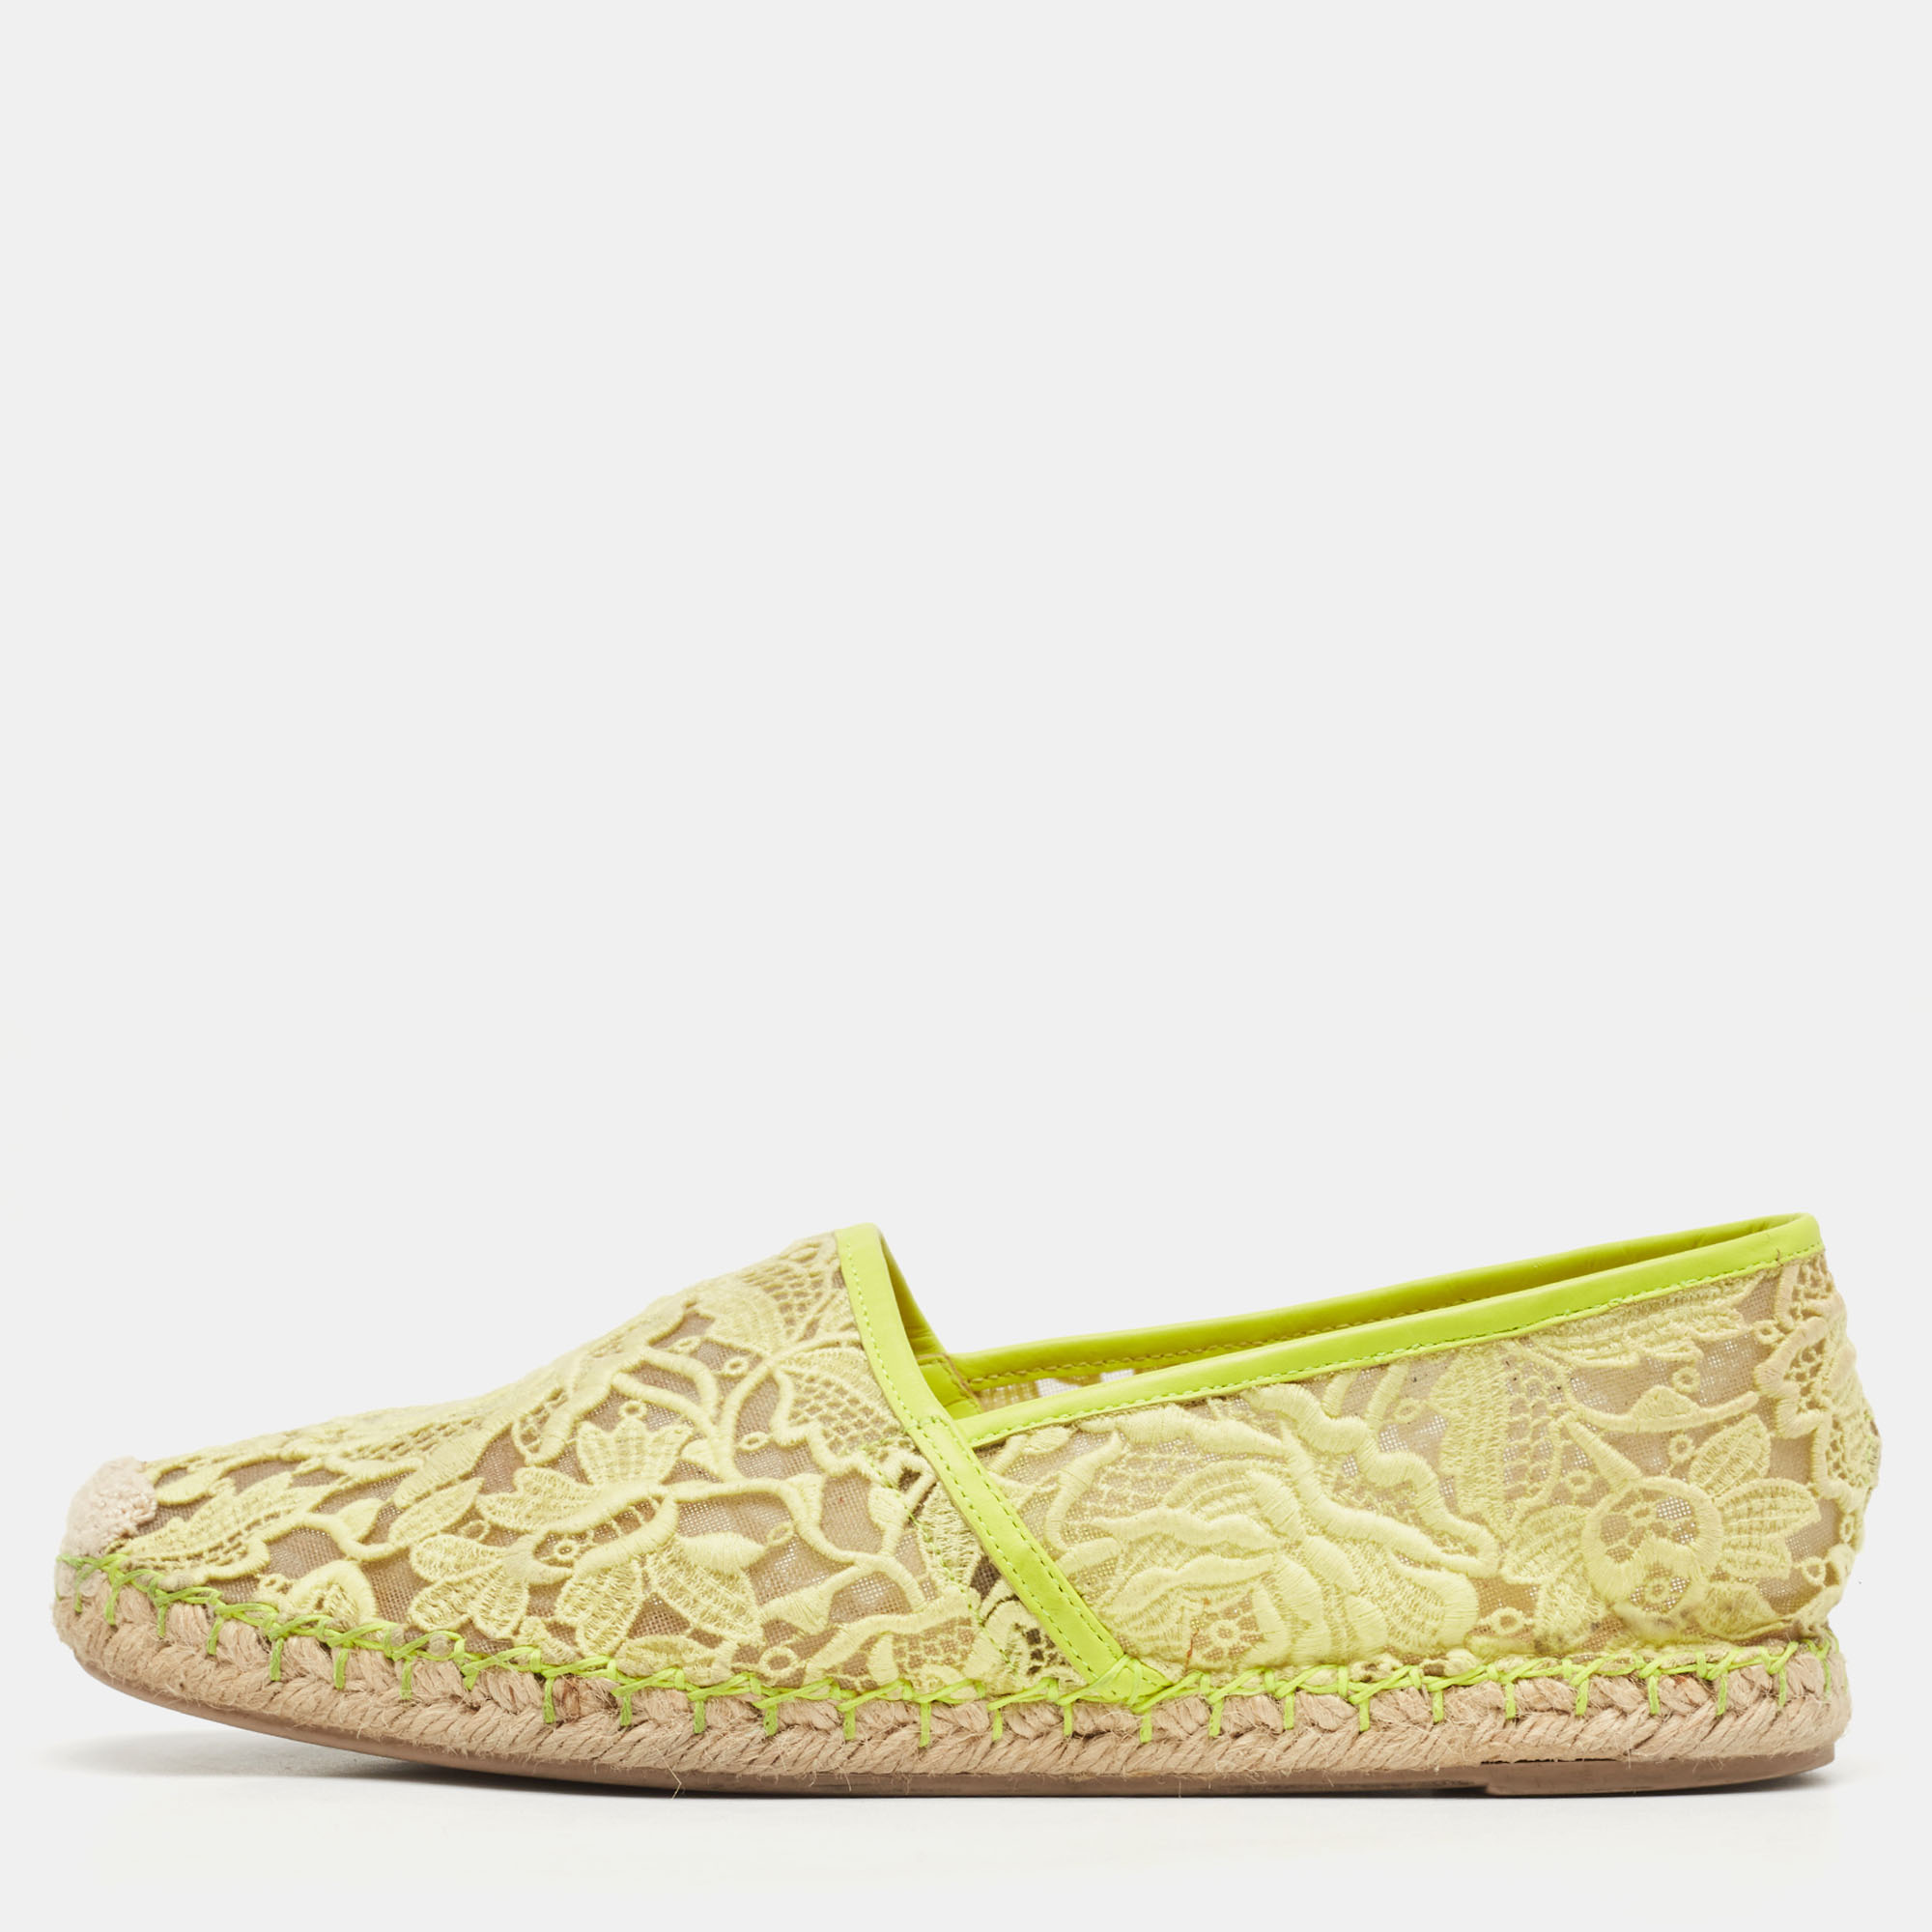 Valentino neon yellow lace and leather espadrille flats size 39